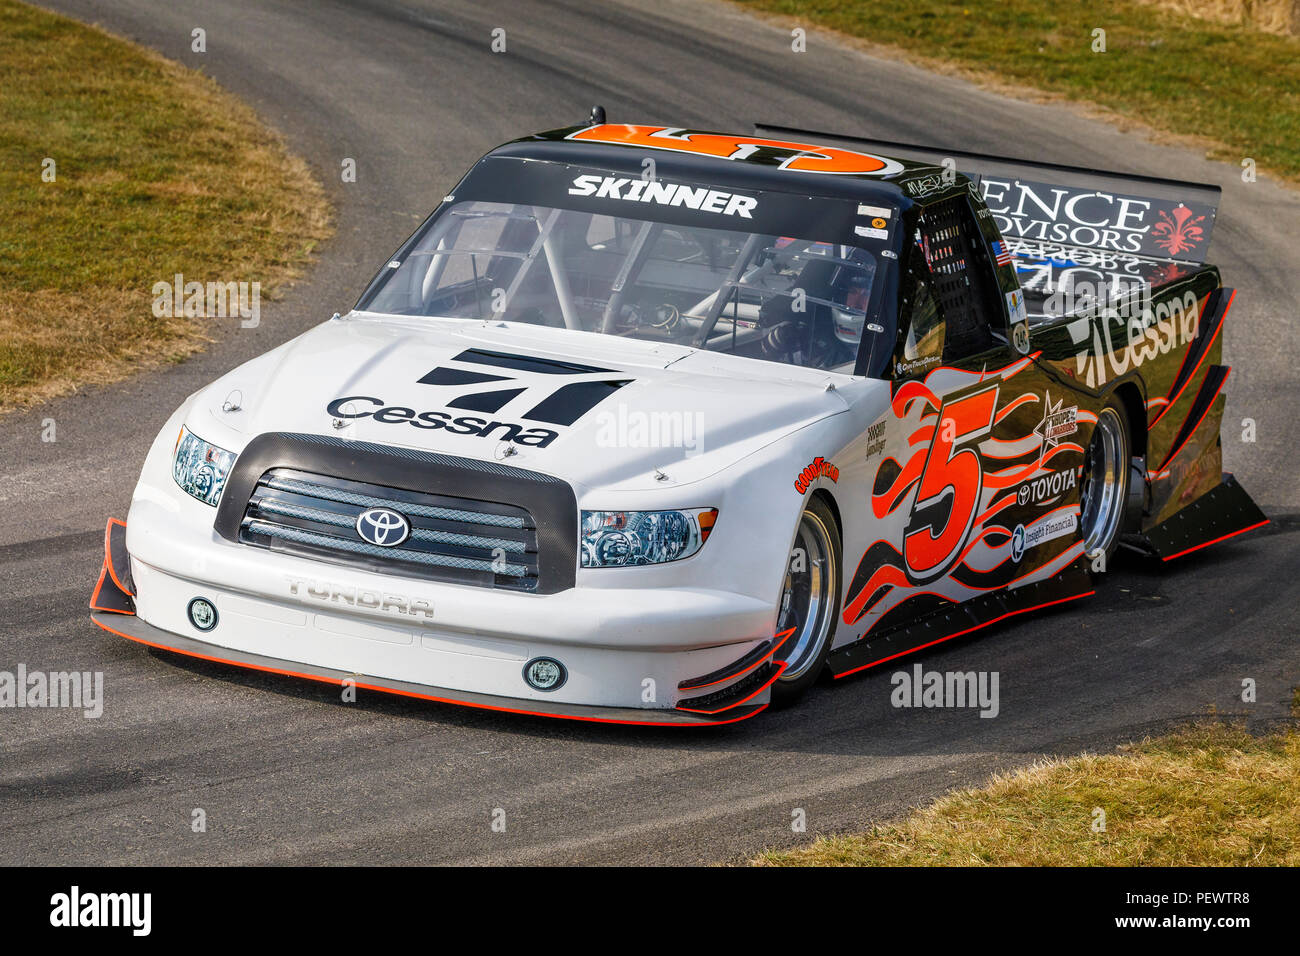 2008 Toyota Tundra NASCAR Truck Championship entrant with driver Mike  Skinner at the 2018 Goodwood Festival of Speed, Sussex, UK Stock Photo -  Alamy